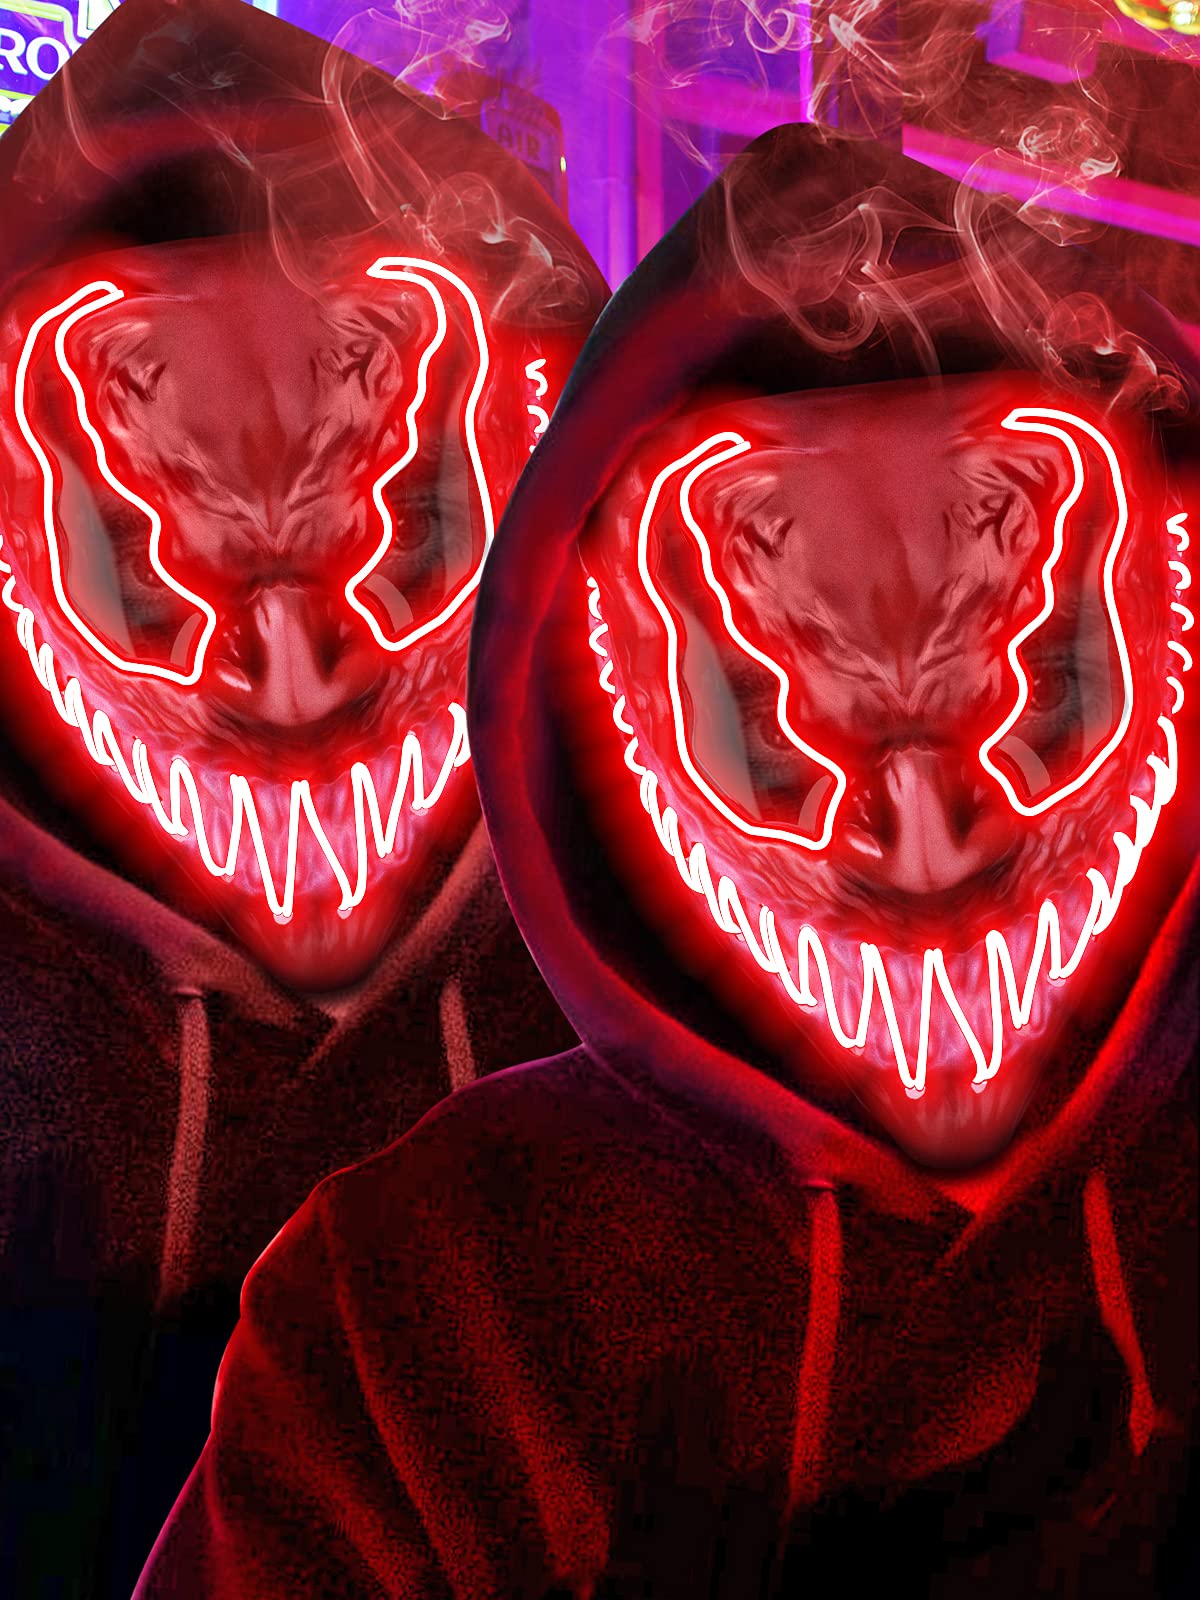 2 Pack Light Up Halloween Mask Scary Costume LED Mask with 3 lighting Modes for Masquerade Cosplay Club Party - Halloween Glowing Mask for Men Women Kids…